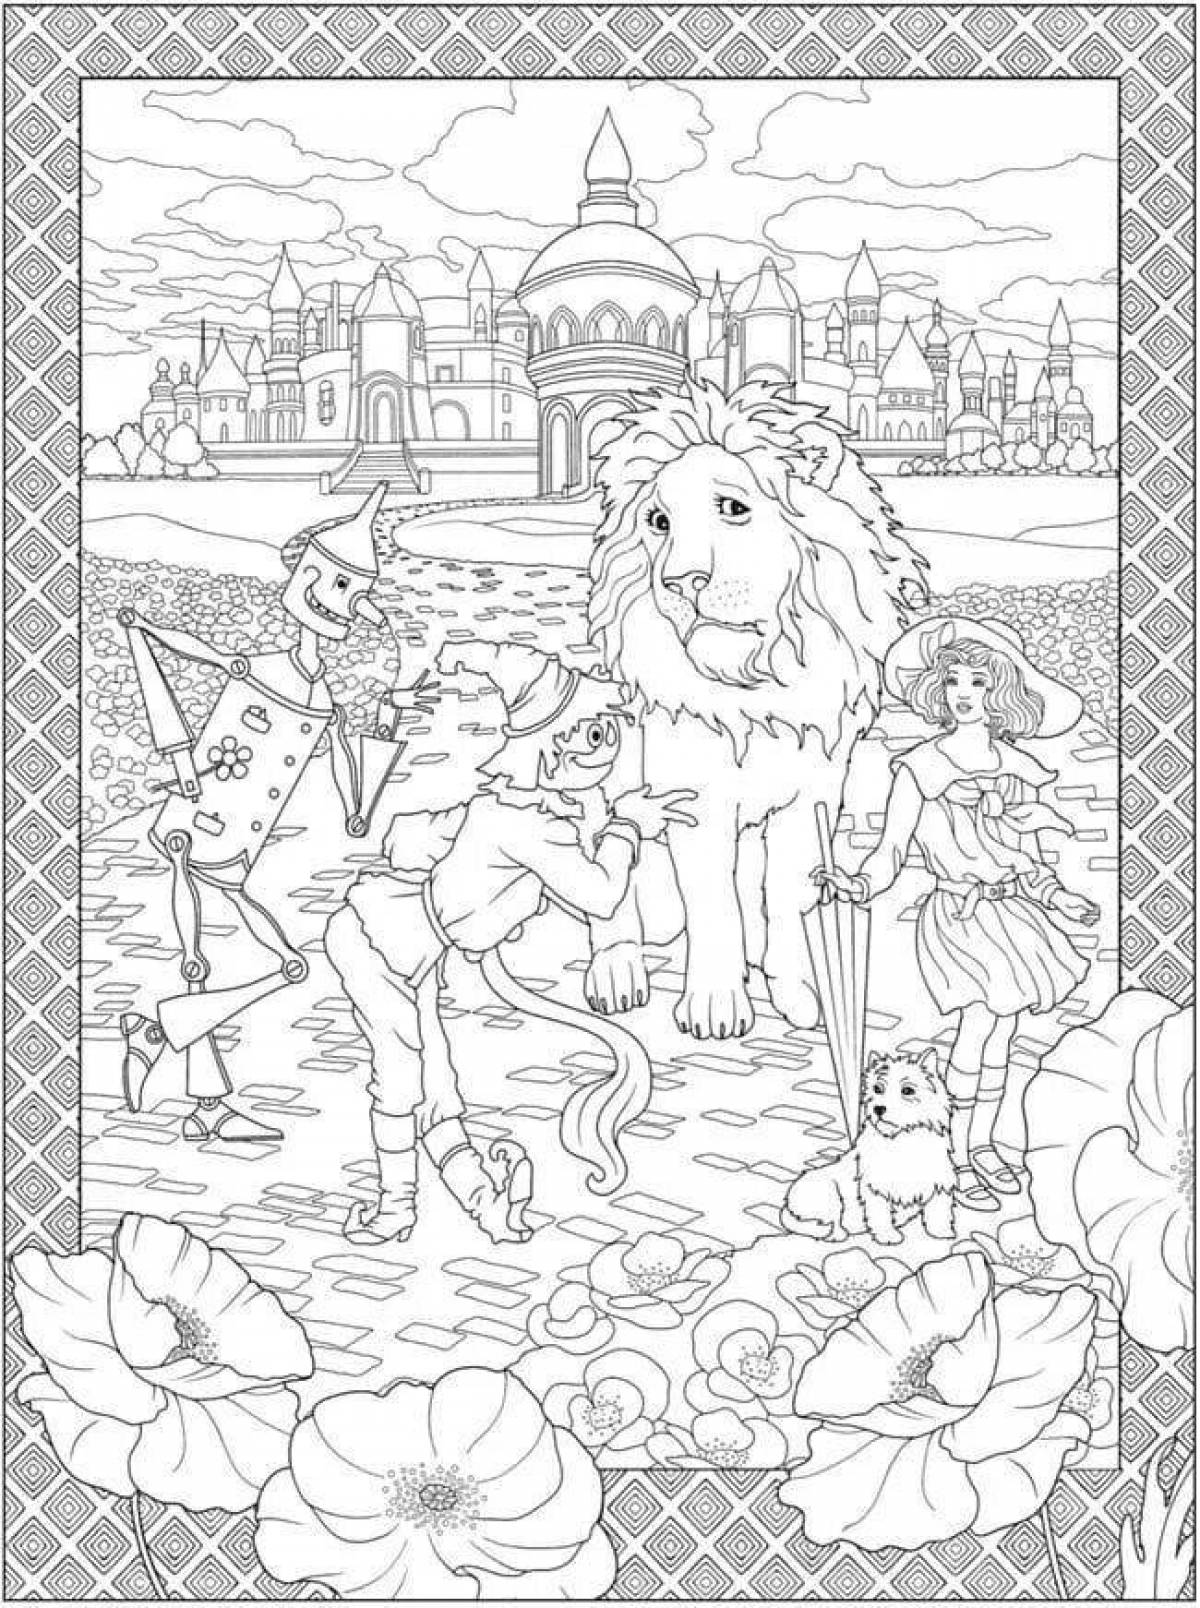 Coloring book fairytale wizard of oz